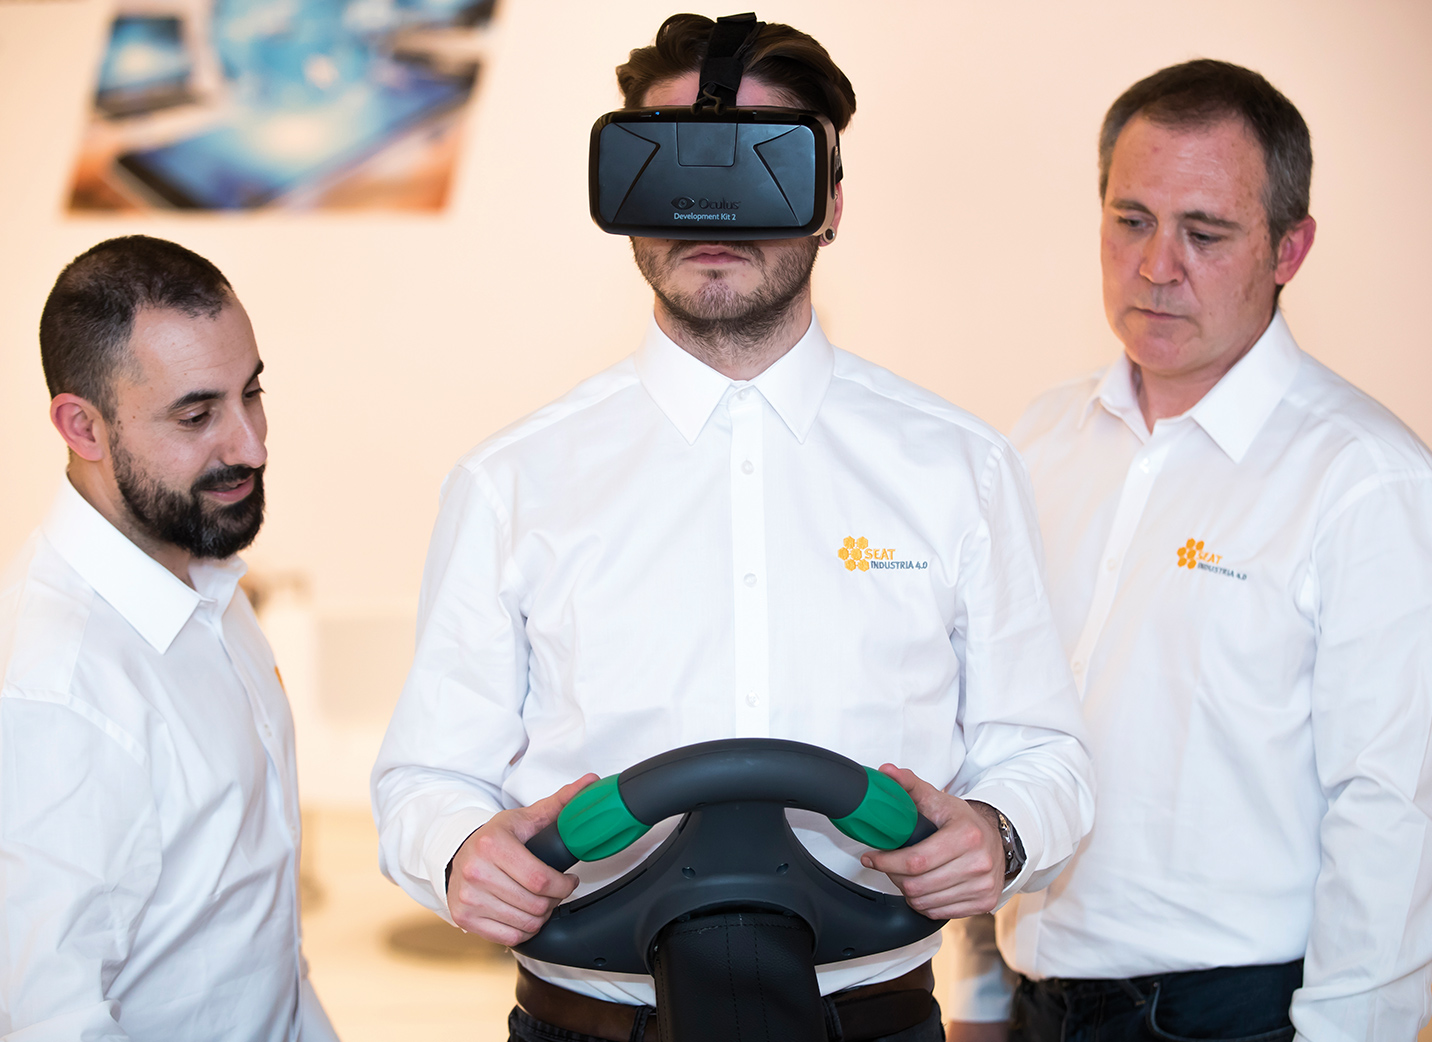 Three SEAT employees training on virtual reality headset and steering wheel